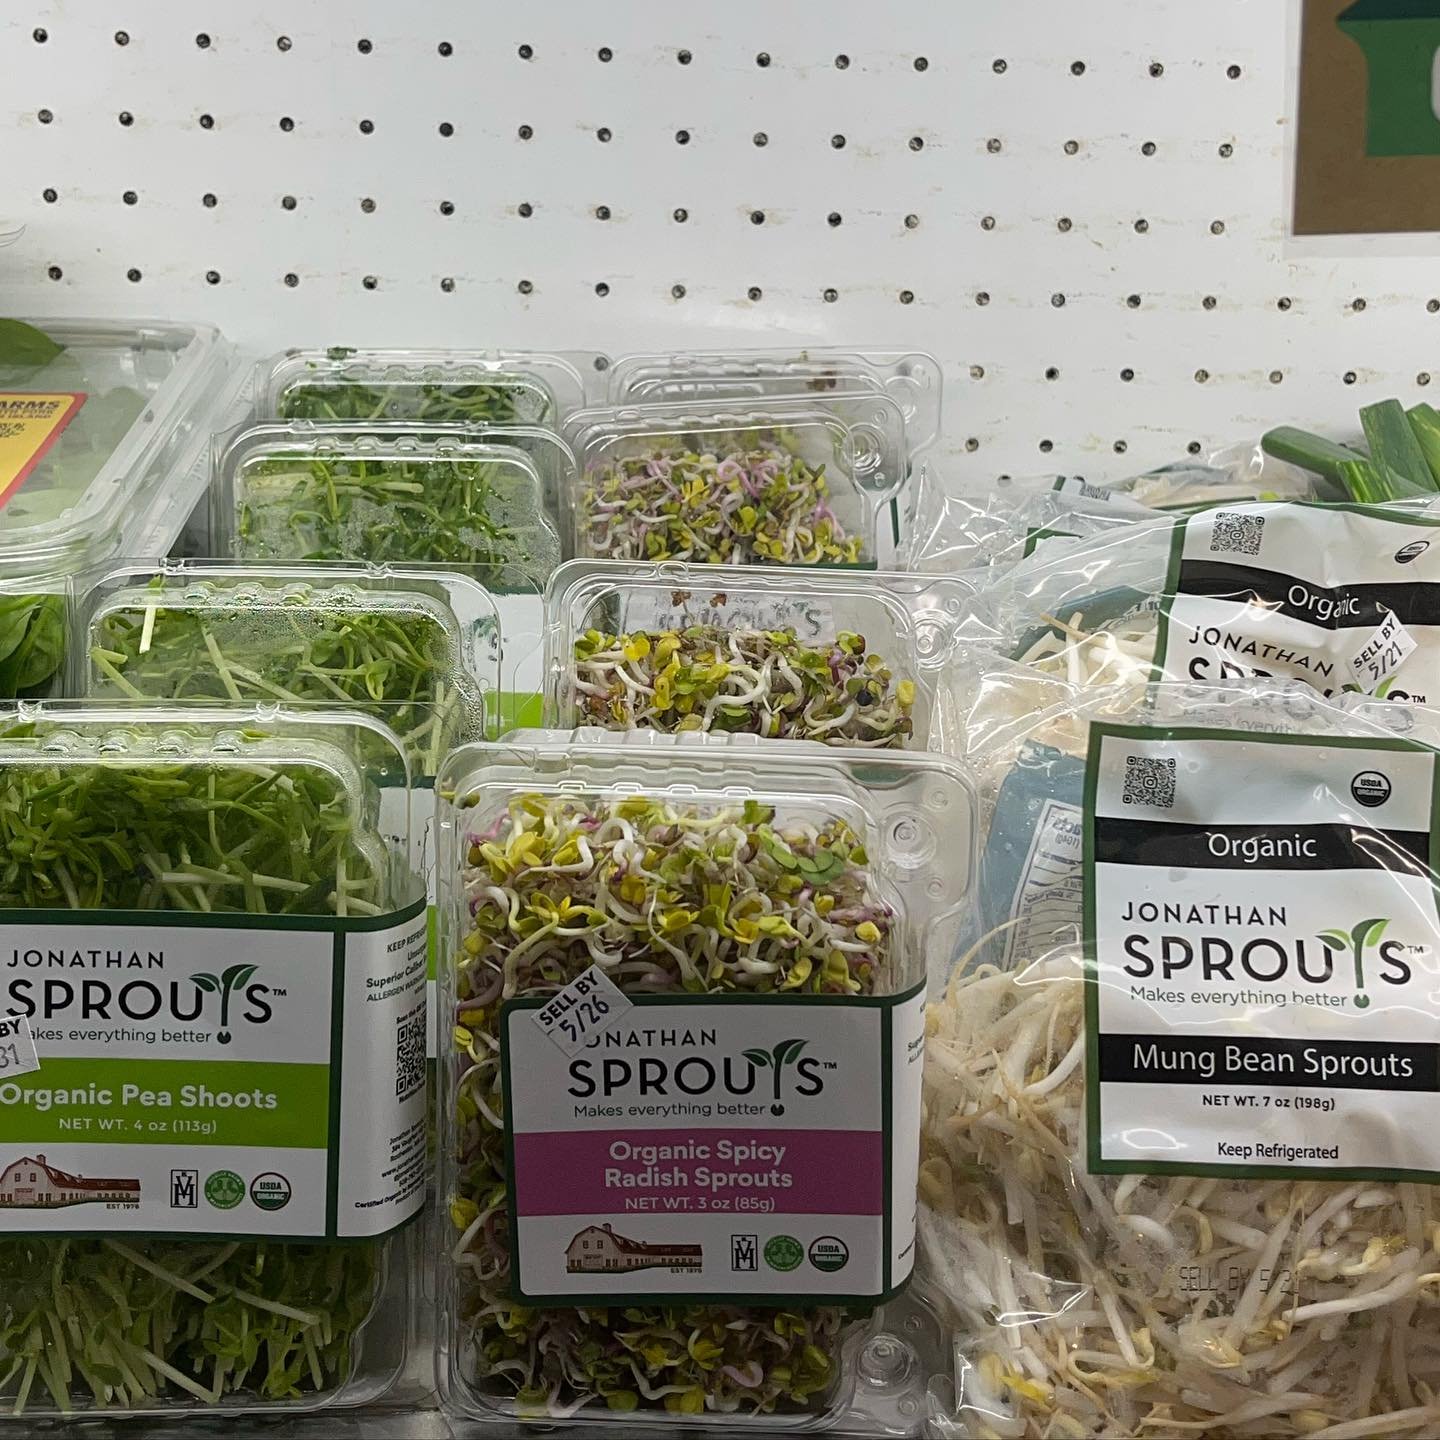 co-op members 🤝 organic sprouts

Come brighten up this gloomy weekend with our favorite spring time veggies and more ☀️🌤☀️